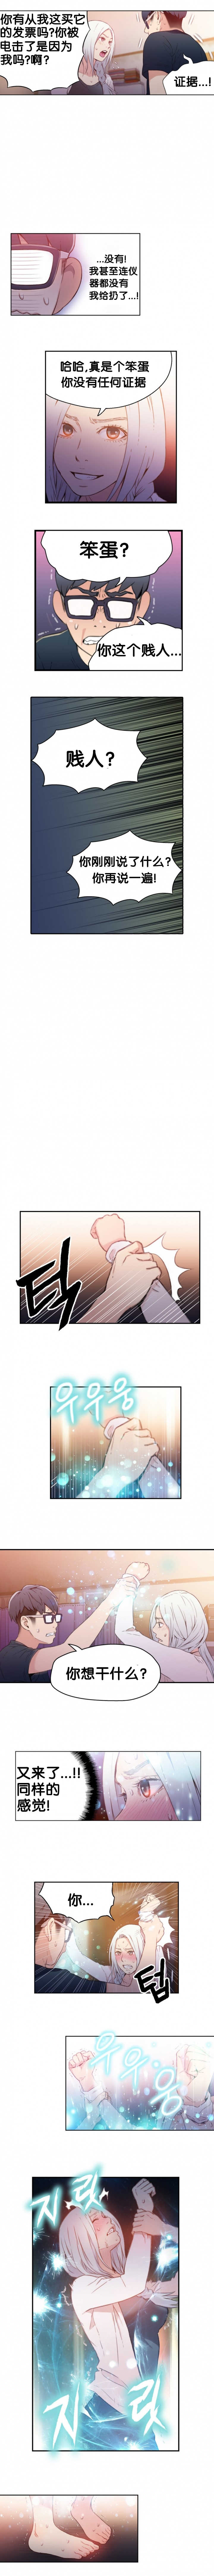 [BAK Hyeong Jun]Sweet Guy Ch.10-12(Chinese)(FITHRPG6) - Page 31